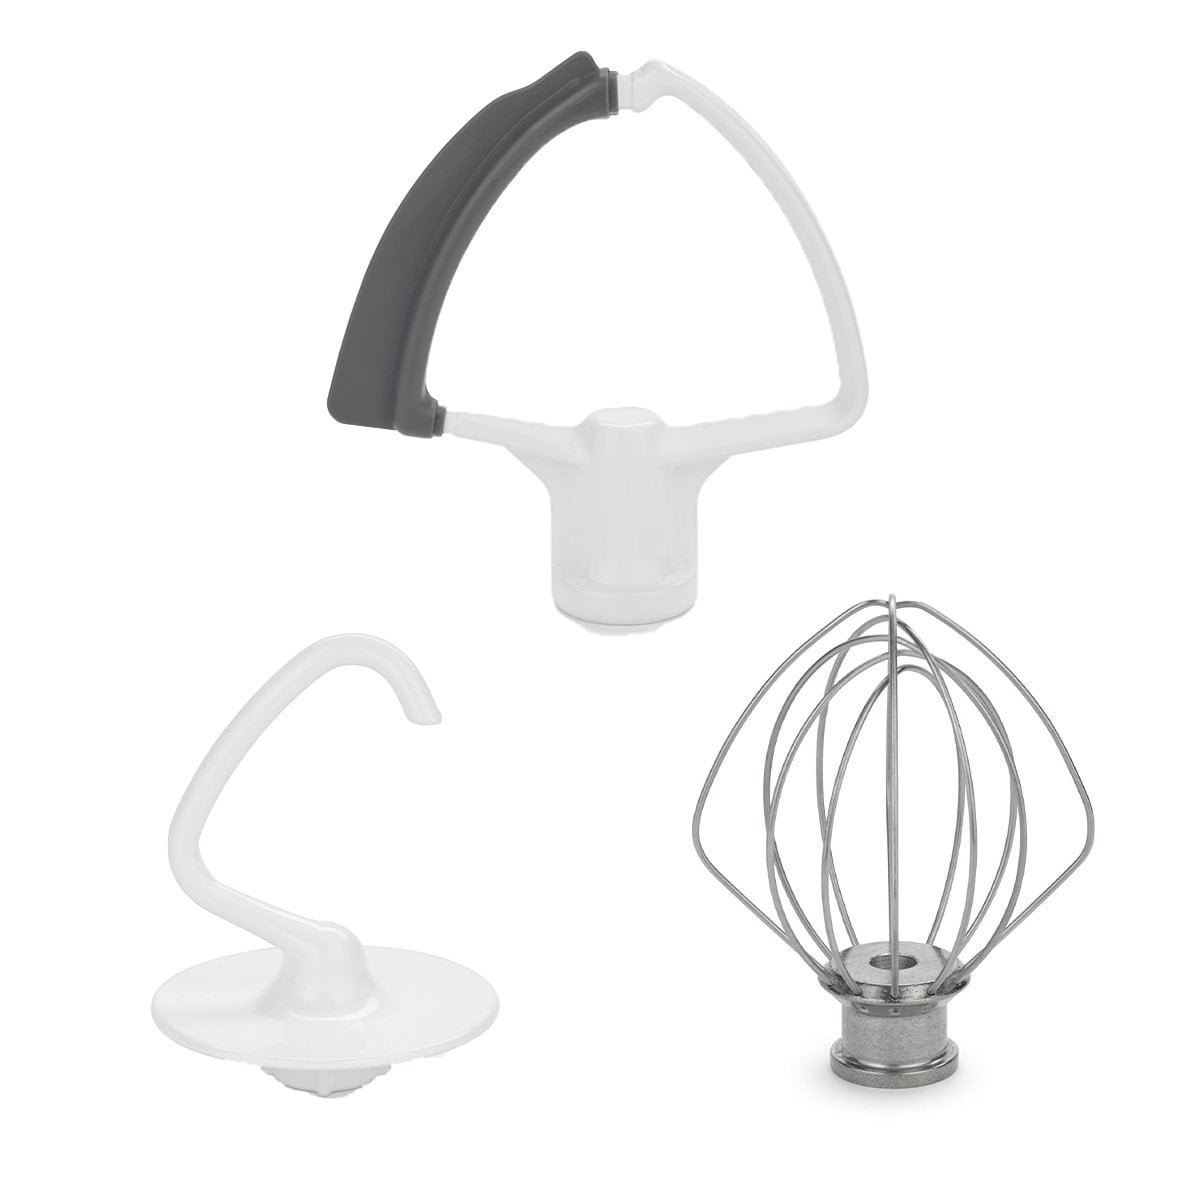  Stand Mixer Attachments 3-Piece Kit -Replace for Kitchen aid  Accessories K45WW Wire Whip/ K45DH Dough Hook /K45B Coated Flat Blade  Paddle with Scraper l Stainless Steel: Home & Kitchen